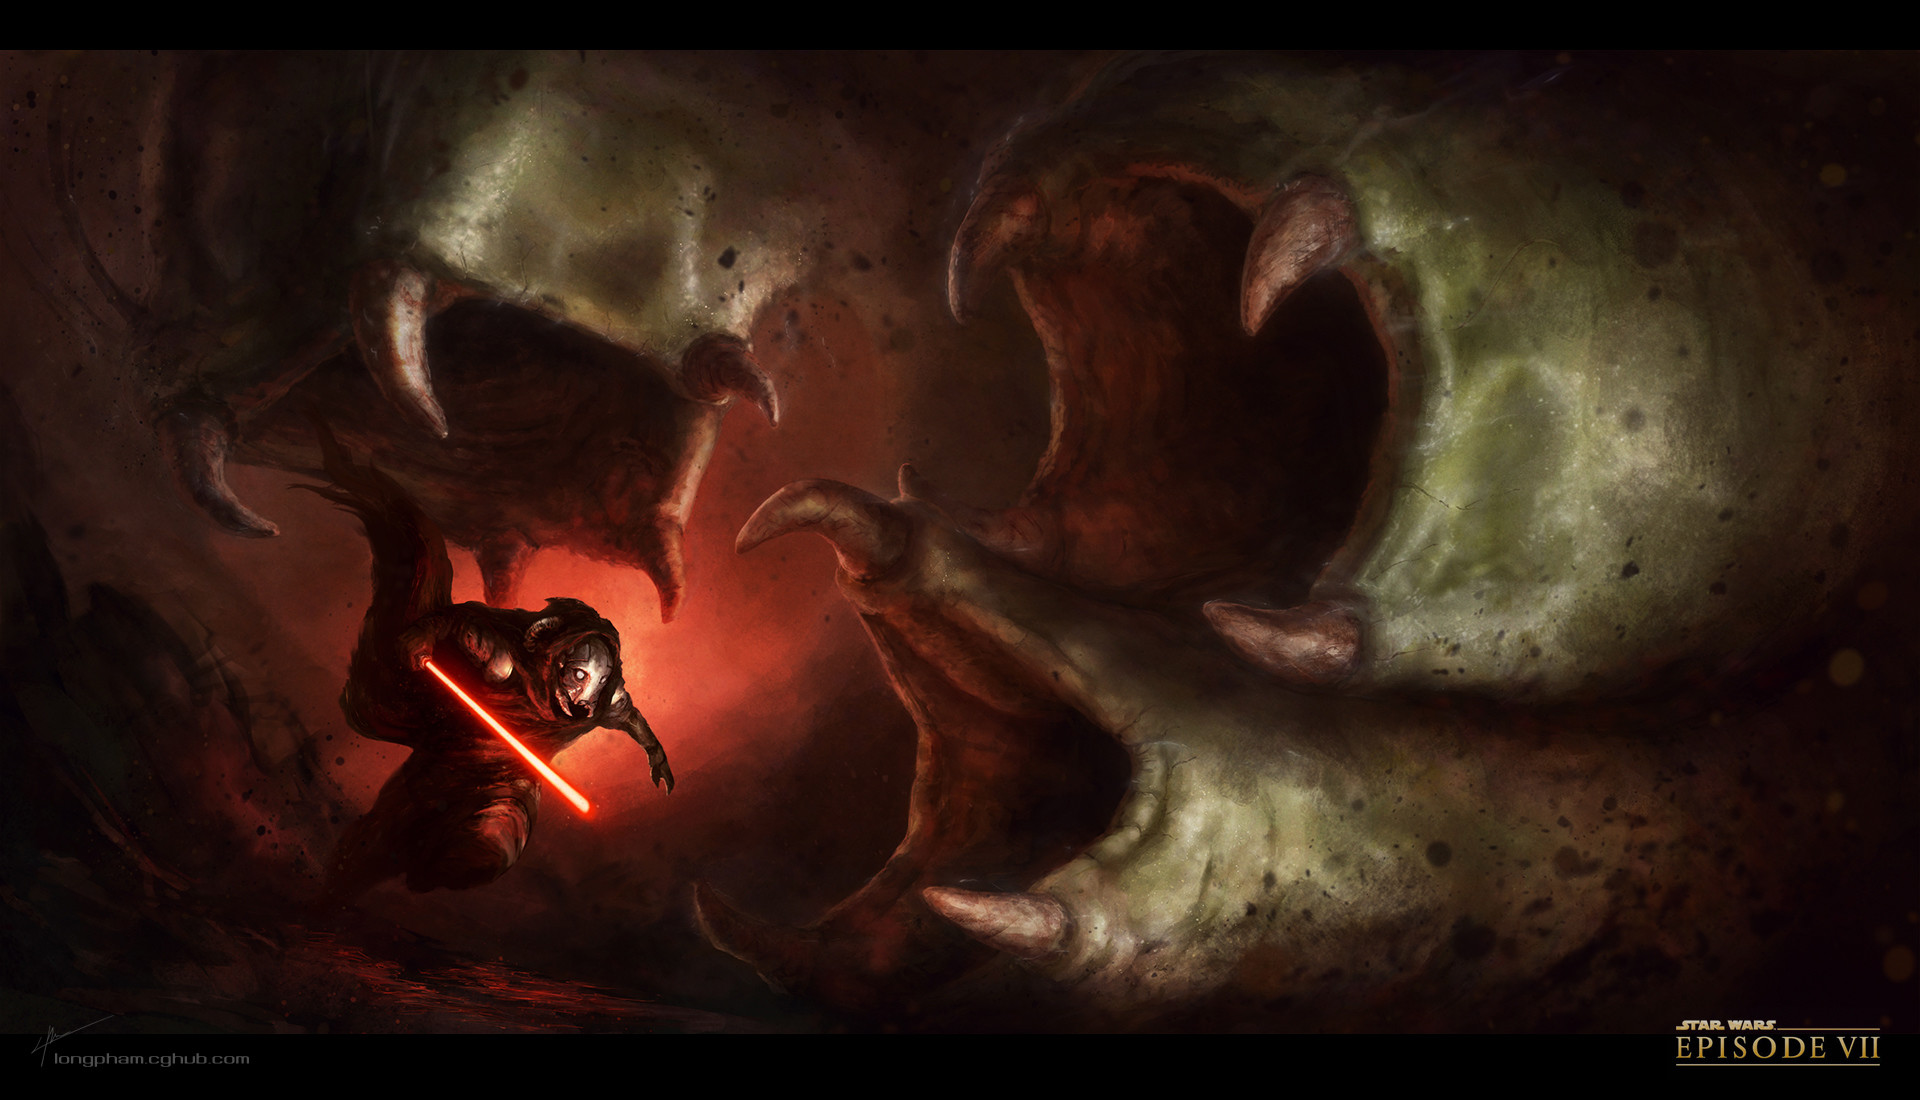 Sith lord escape by Long Pham